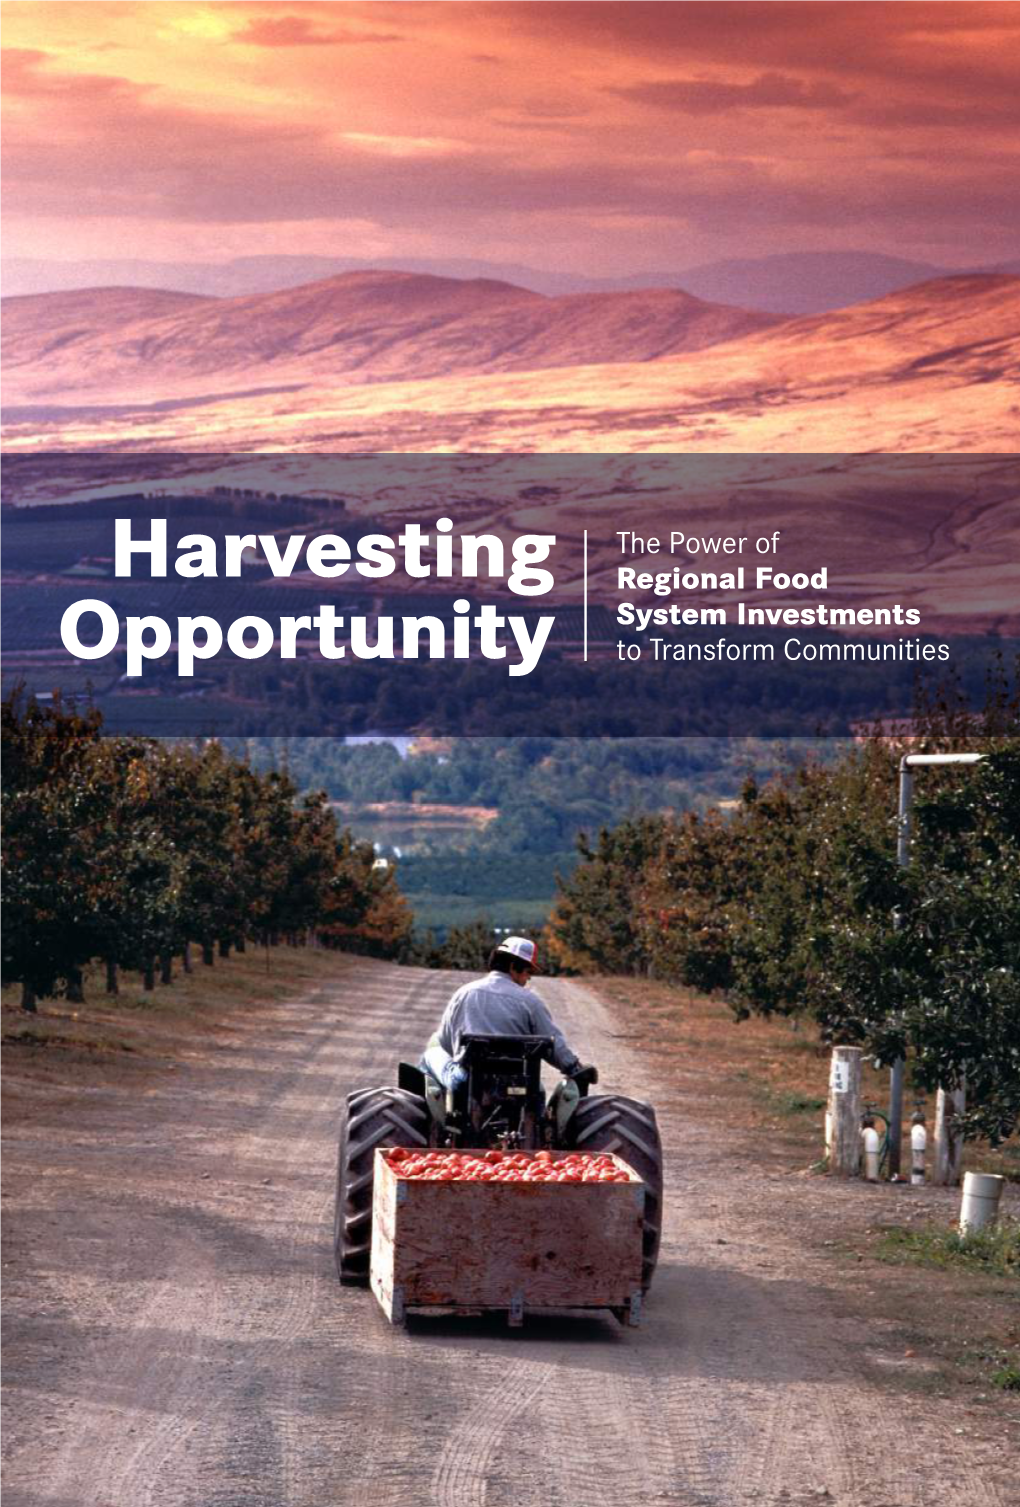 Harvesting Opportunity: the Power of Regional Food System Investments to Transform Communities Contents